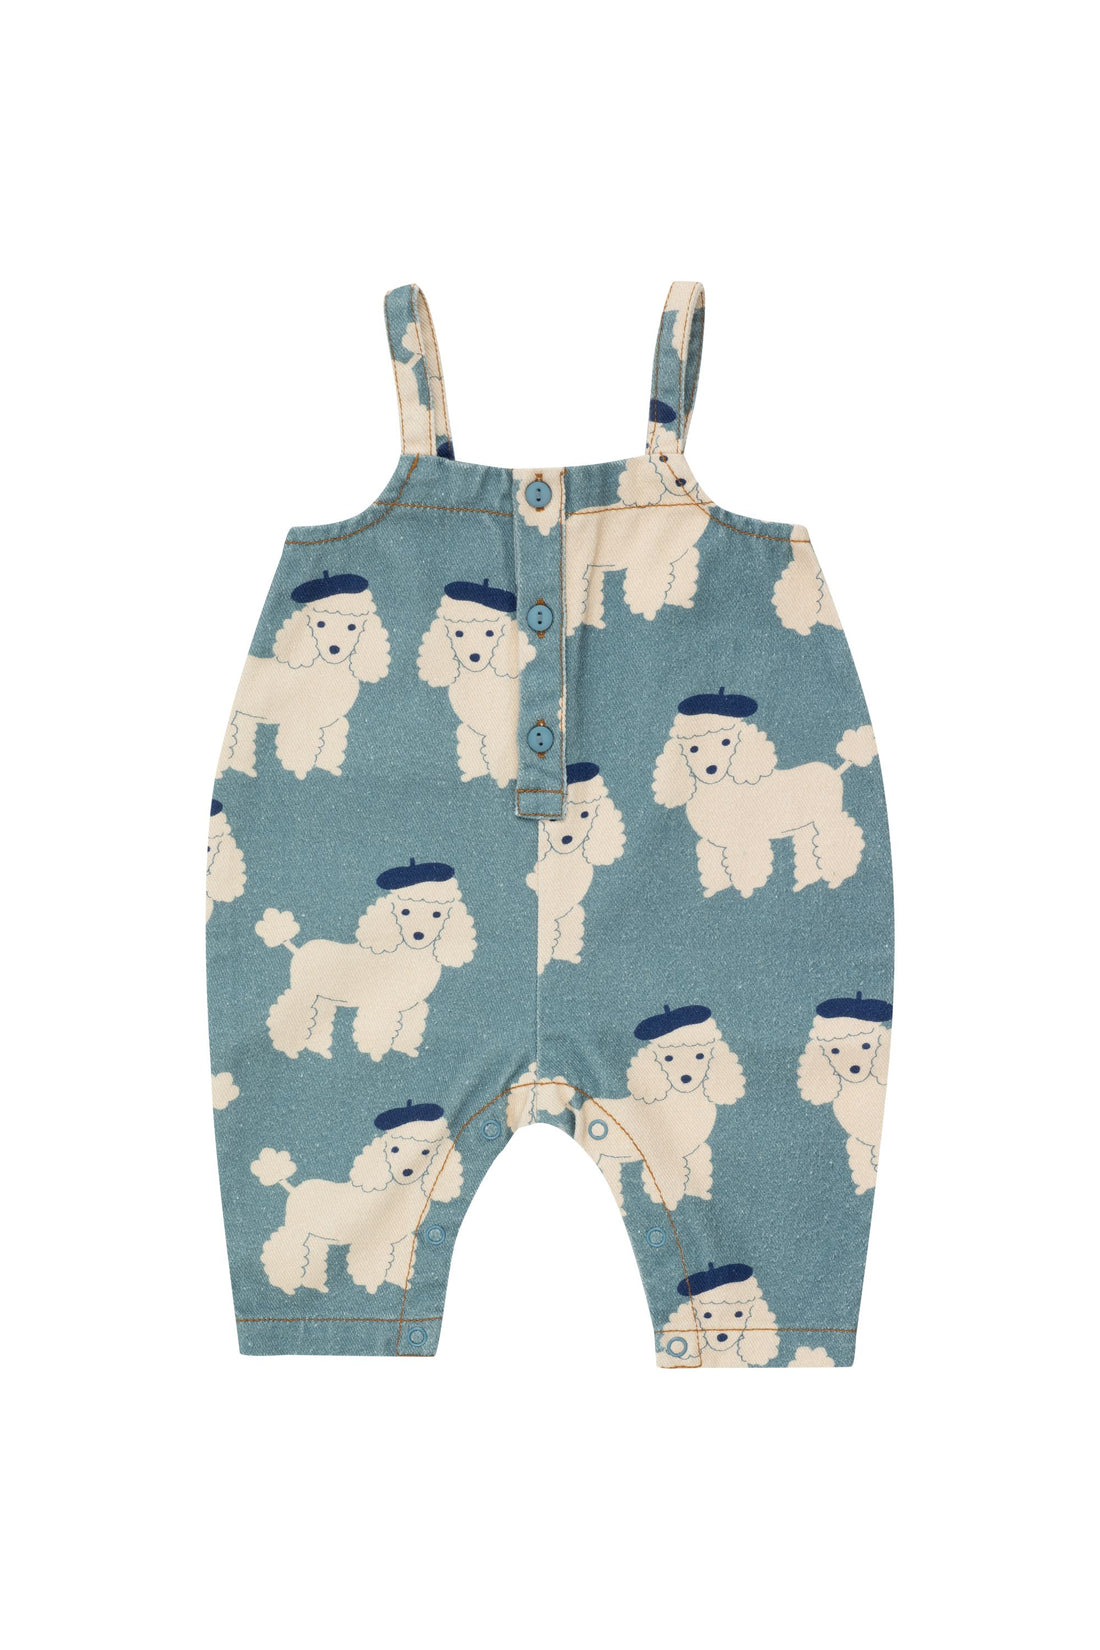 Tiny Cottons - baby poodle dungaree - blue grey